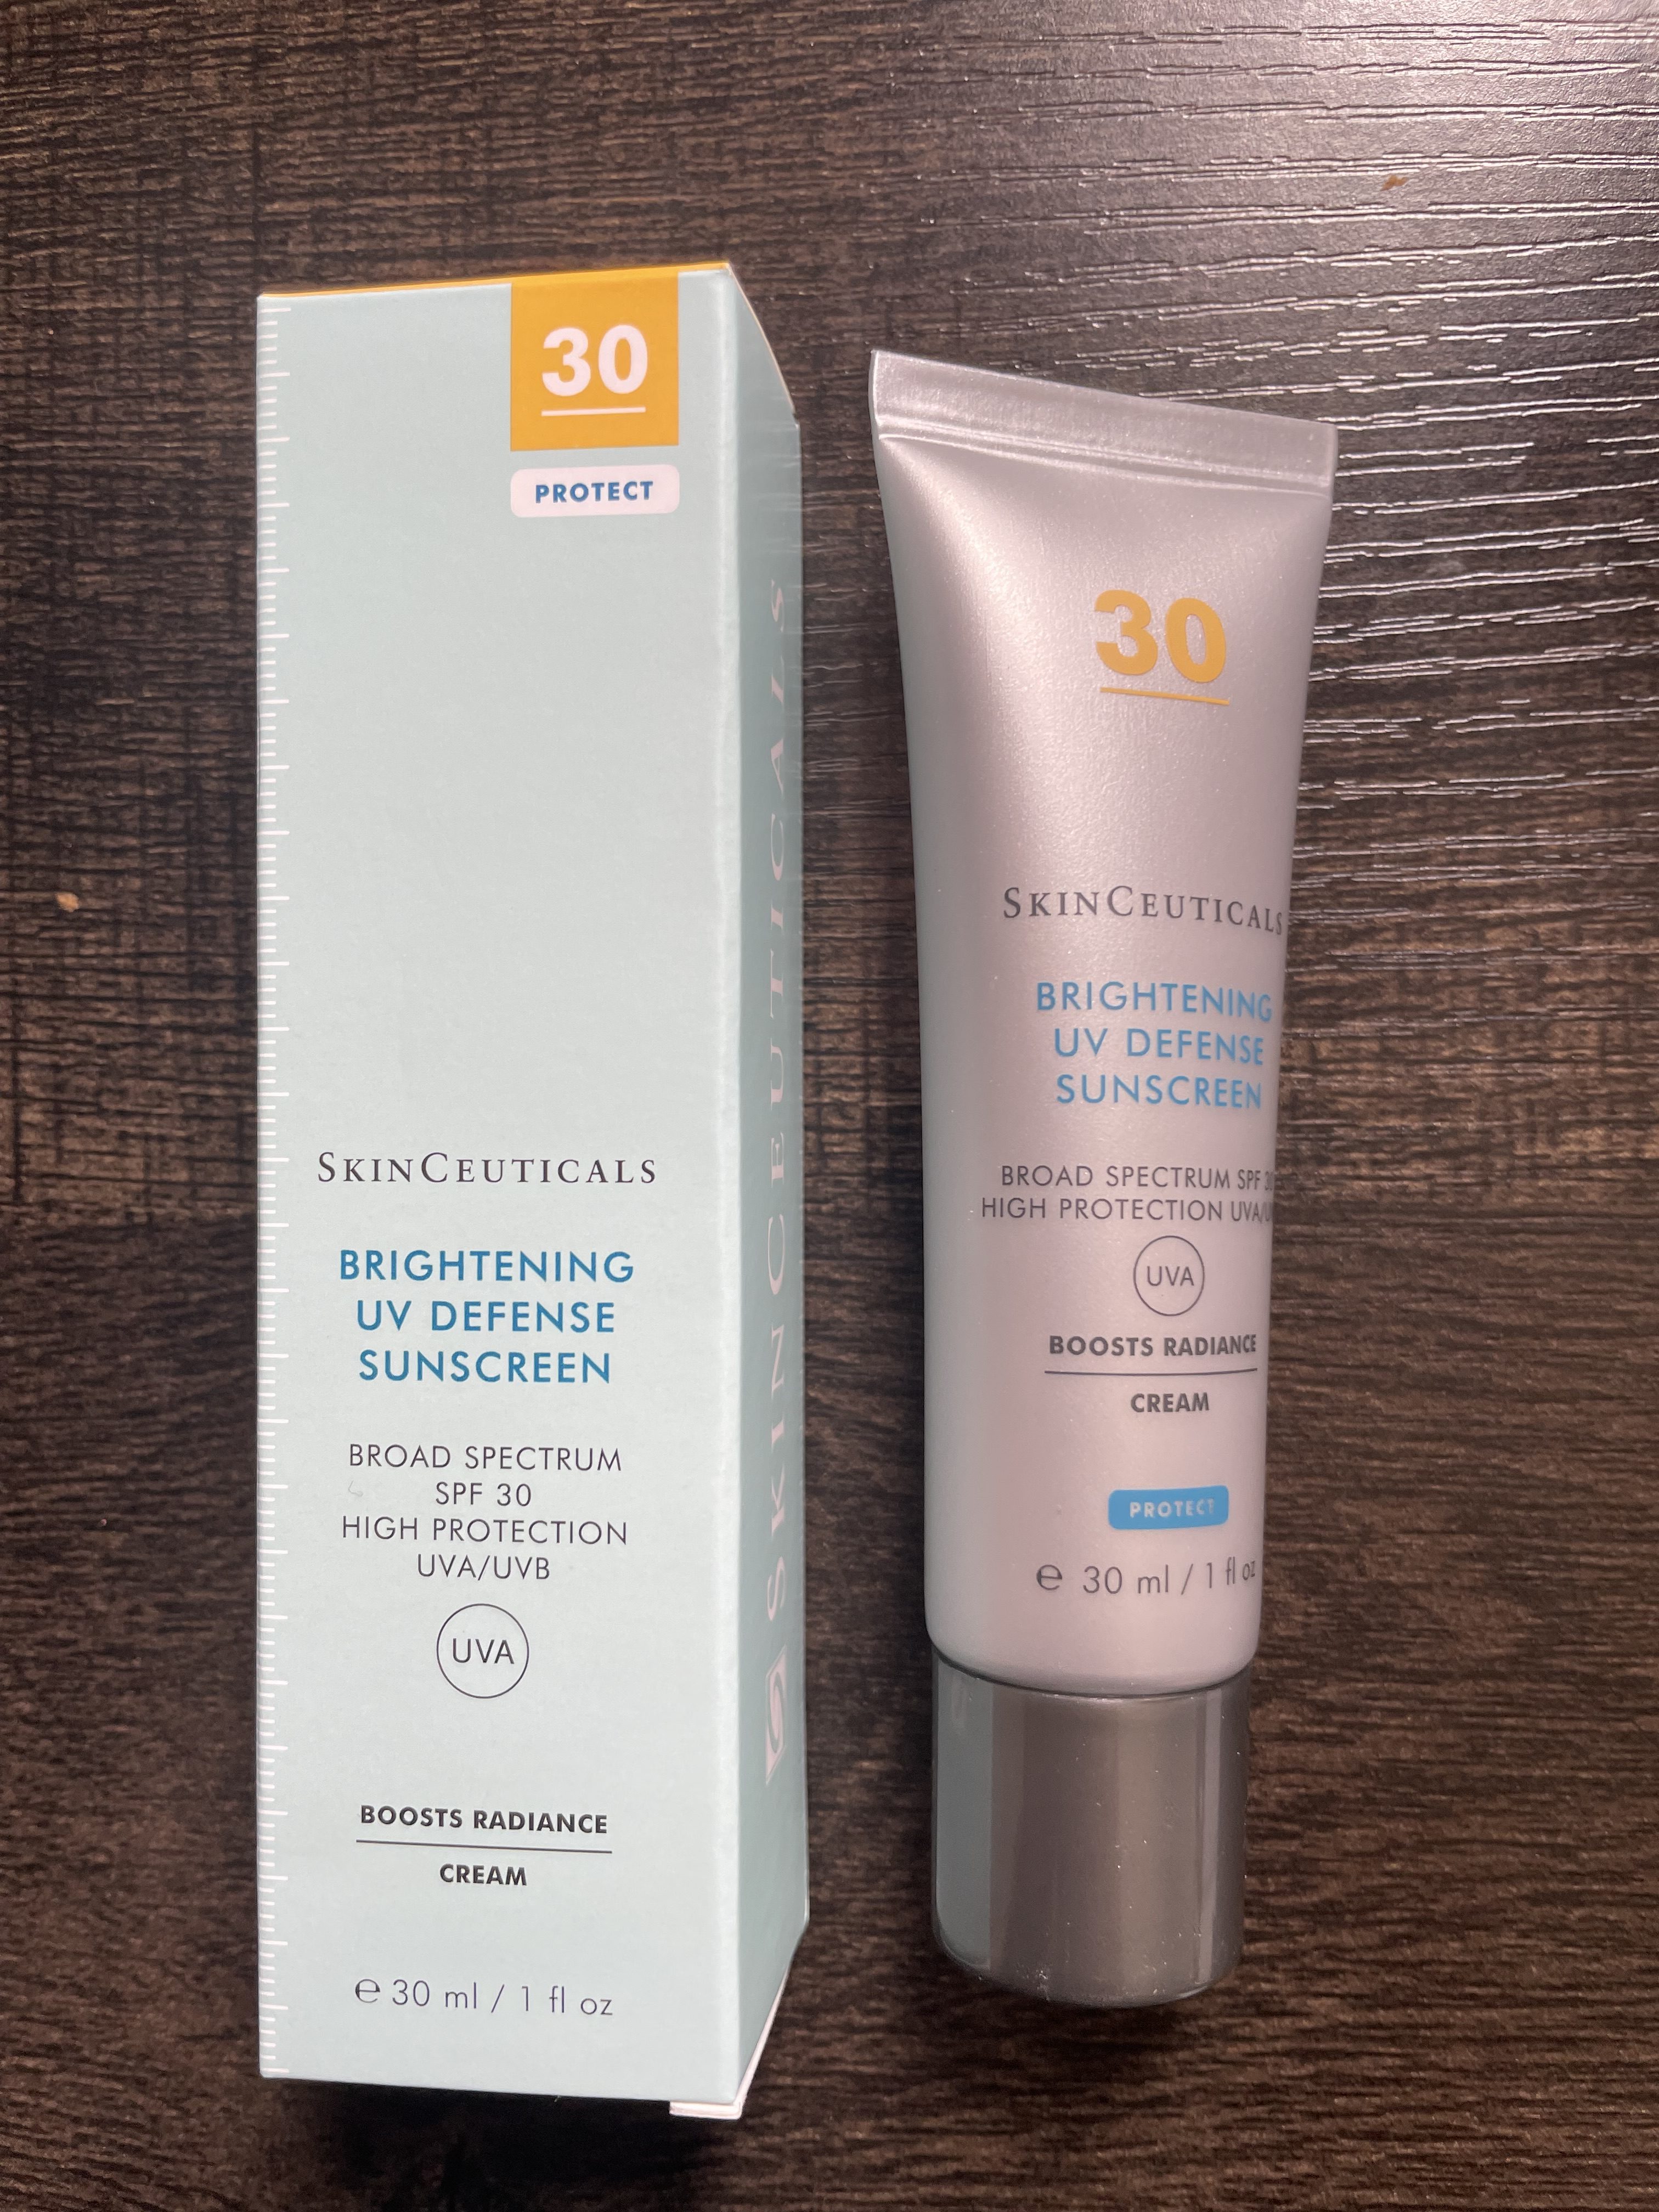 The SkinCeuticals SPF is an investment for your skin.